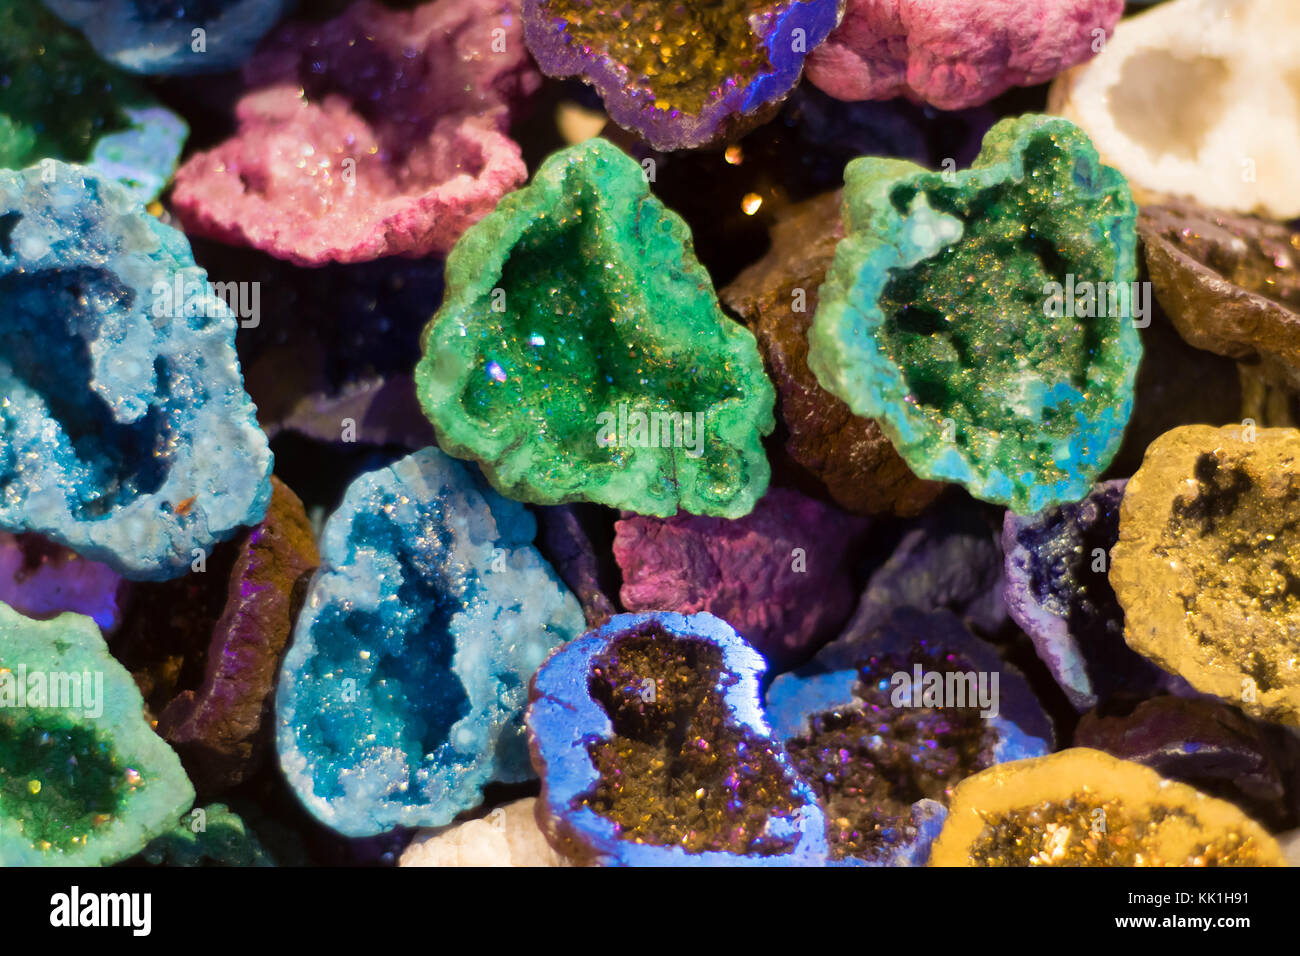 Colourful geodes cut open. Vibrant geological structures showing crystalline minerals within Stock Photo